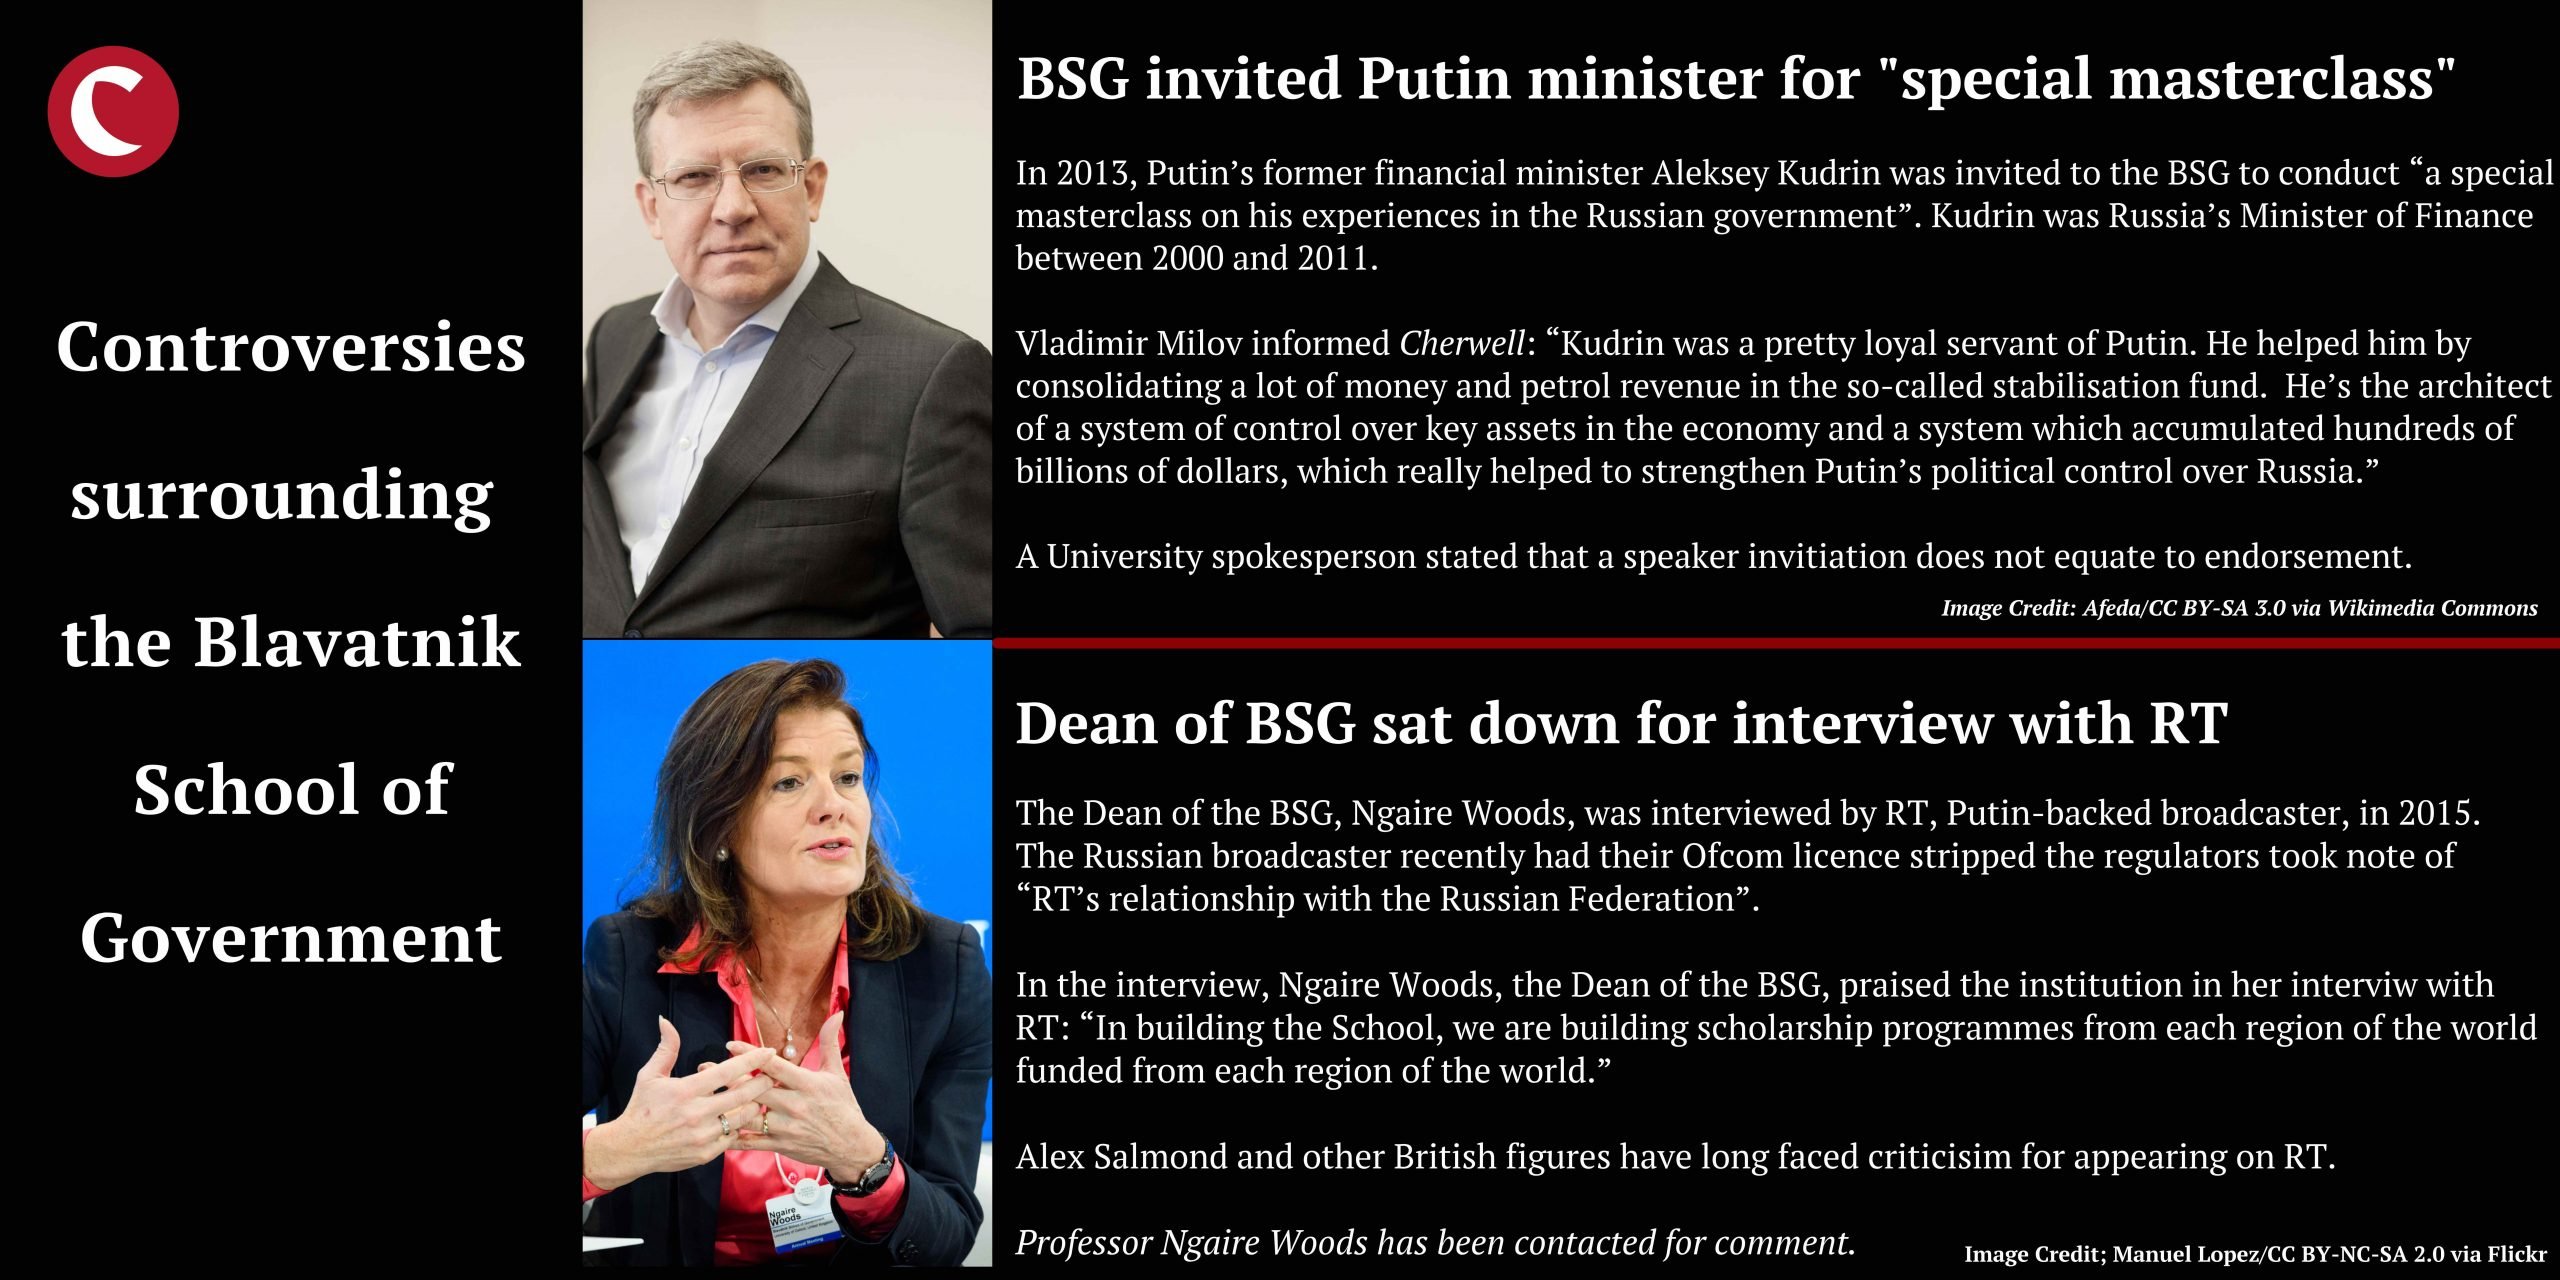 Controversies surrounding 
the Blavatnik School of Government: 

BSG invited Putin minister for "special masterclass"

In 2013, Putin’s former financial minister Aleksey Kudrin was invited to the BSG to conduct “a special masterclass on his experiences in the Russian government”. Kudrin was Russia’s Minister of Finance between 2000 and 2011. 

Vladimir Milov informed Cherwell: “Kudrin was a pretty loyal servant of Putin. He helped him by consolidating a lot of money and petrol revenue in the so-called stabilisation fund.  He’s the architect of a system of control over key assets in the economy and a system which accumulated hundreds of billions of dollars, which really helped to strengthen Putin’s political control over Russia.”

A University spokesperson stated that a speaker invitiation does not equate to endorsement. 

Image Credit: Afeda/CC BY-SA 3.0 via Wikimedia Commons


Dean of BSG sat down for interview with RT

The Dean of the BSG, Ngaire Woods, was interviewed by RT, Putin-backed broadcaster, in 2015. The Russian broadcaster recently had their Ofcom licence stripped the regulators took note of “RT’s relationship with the Russian Federation”. 

In the interview, Ngaire Woods, the Dean of the BSG, praised the institution in her interviw with RT: “In building the School, we are building scholarship programmes from each region of the world funded from each region of the world.”  

Alex Salmond and other British figures have long faced criticisim for appearing on RT.  

Professor Ngaire Woods has been contacted for comment. 

Image Credit; Manuel Lopez/CC BY-NC-SA 2.0 via Flickr